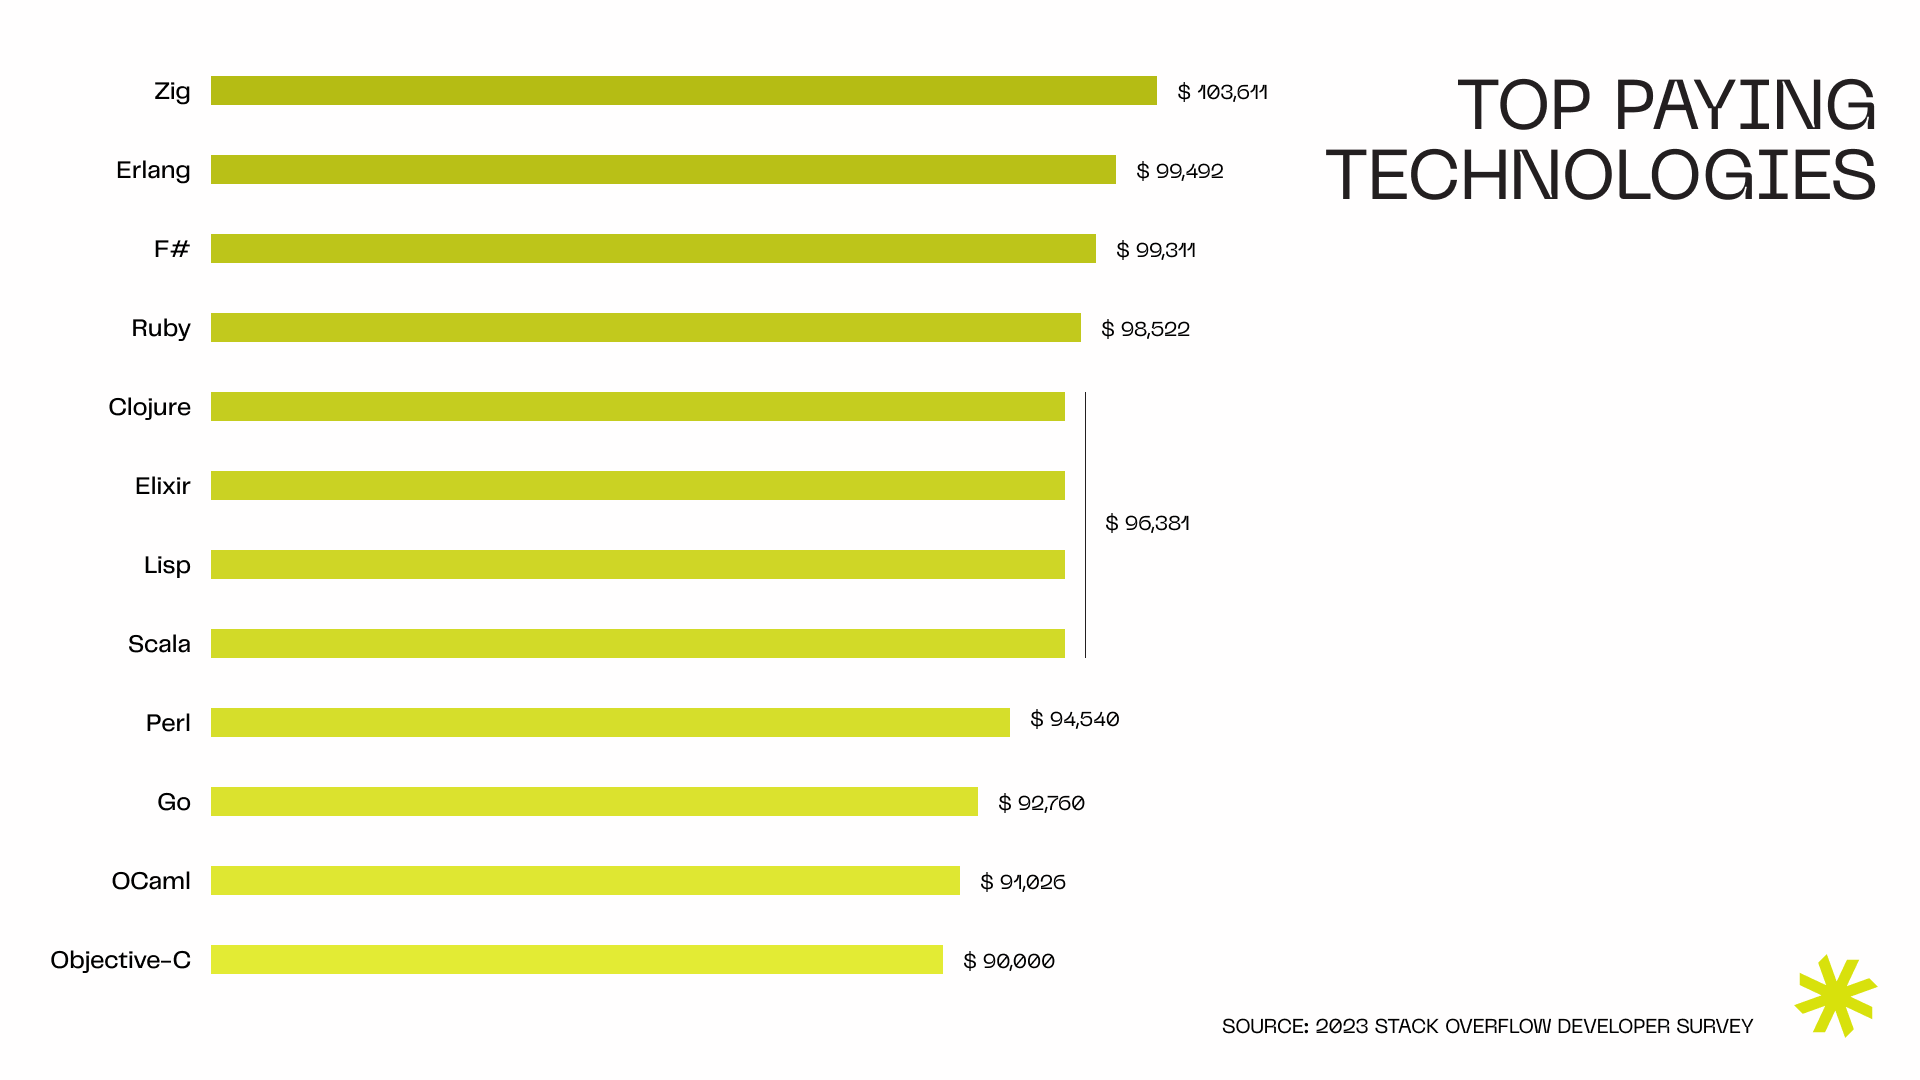 The most expensive technologies for software development